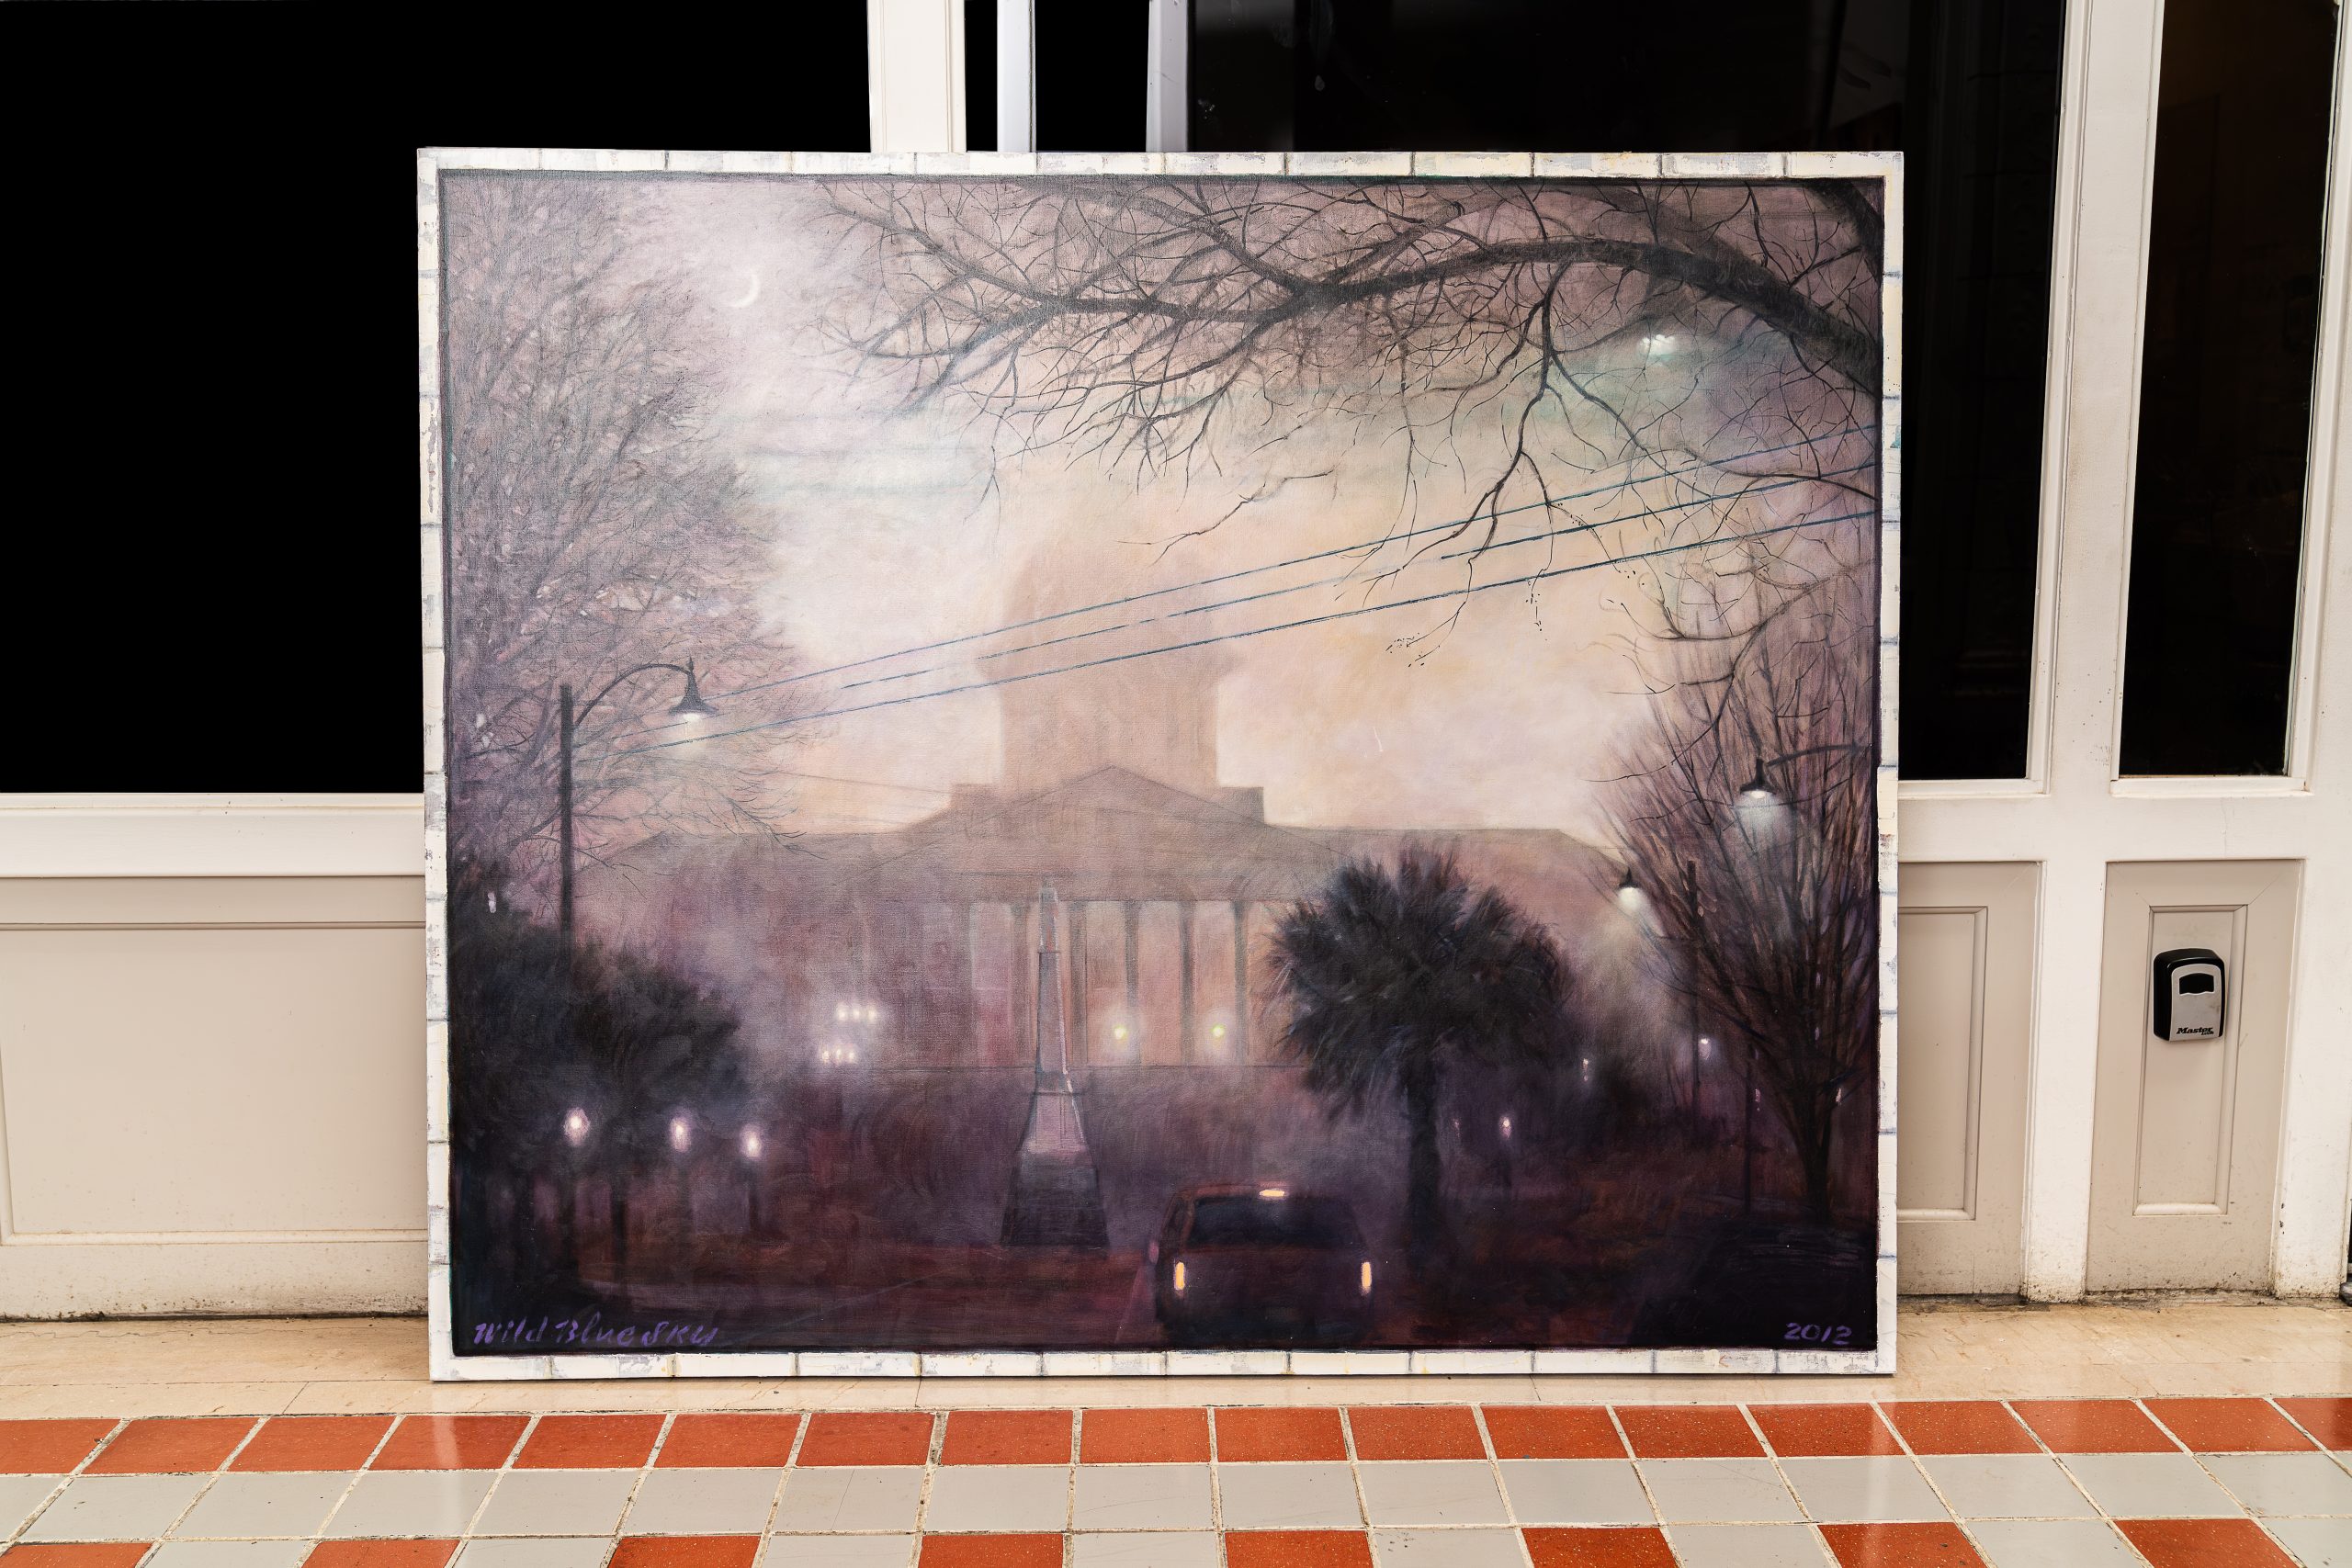 Foggy Dome, 2012, 60 inches by 72 inches. 